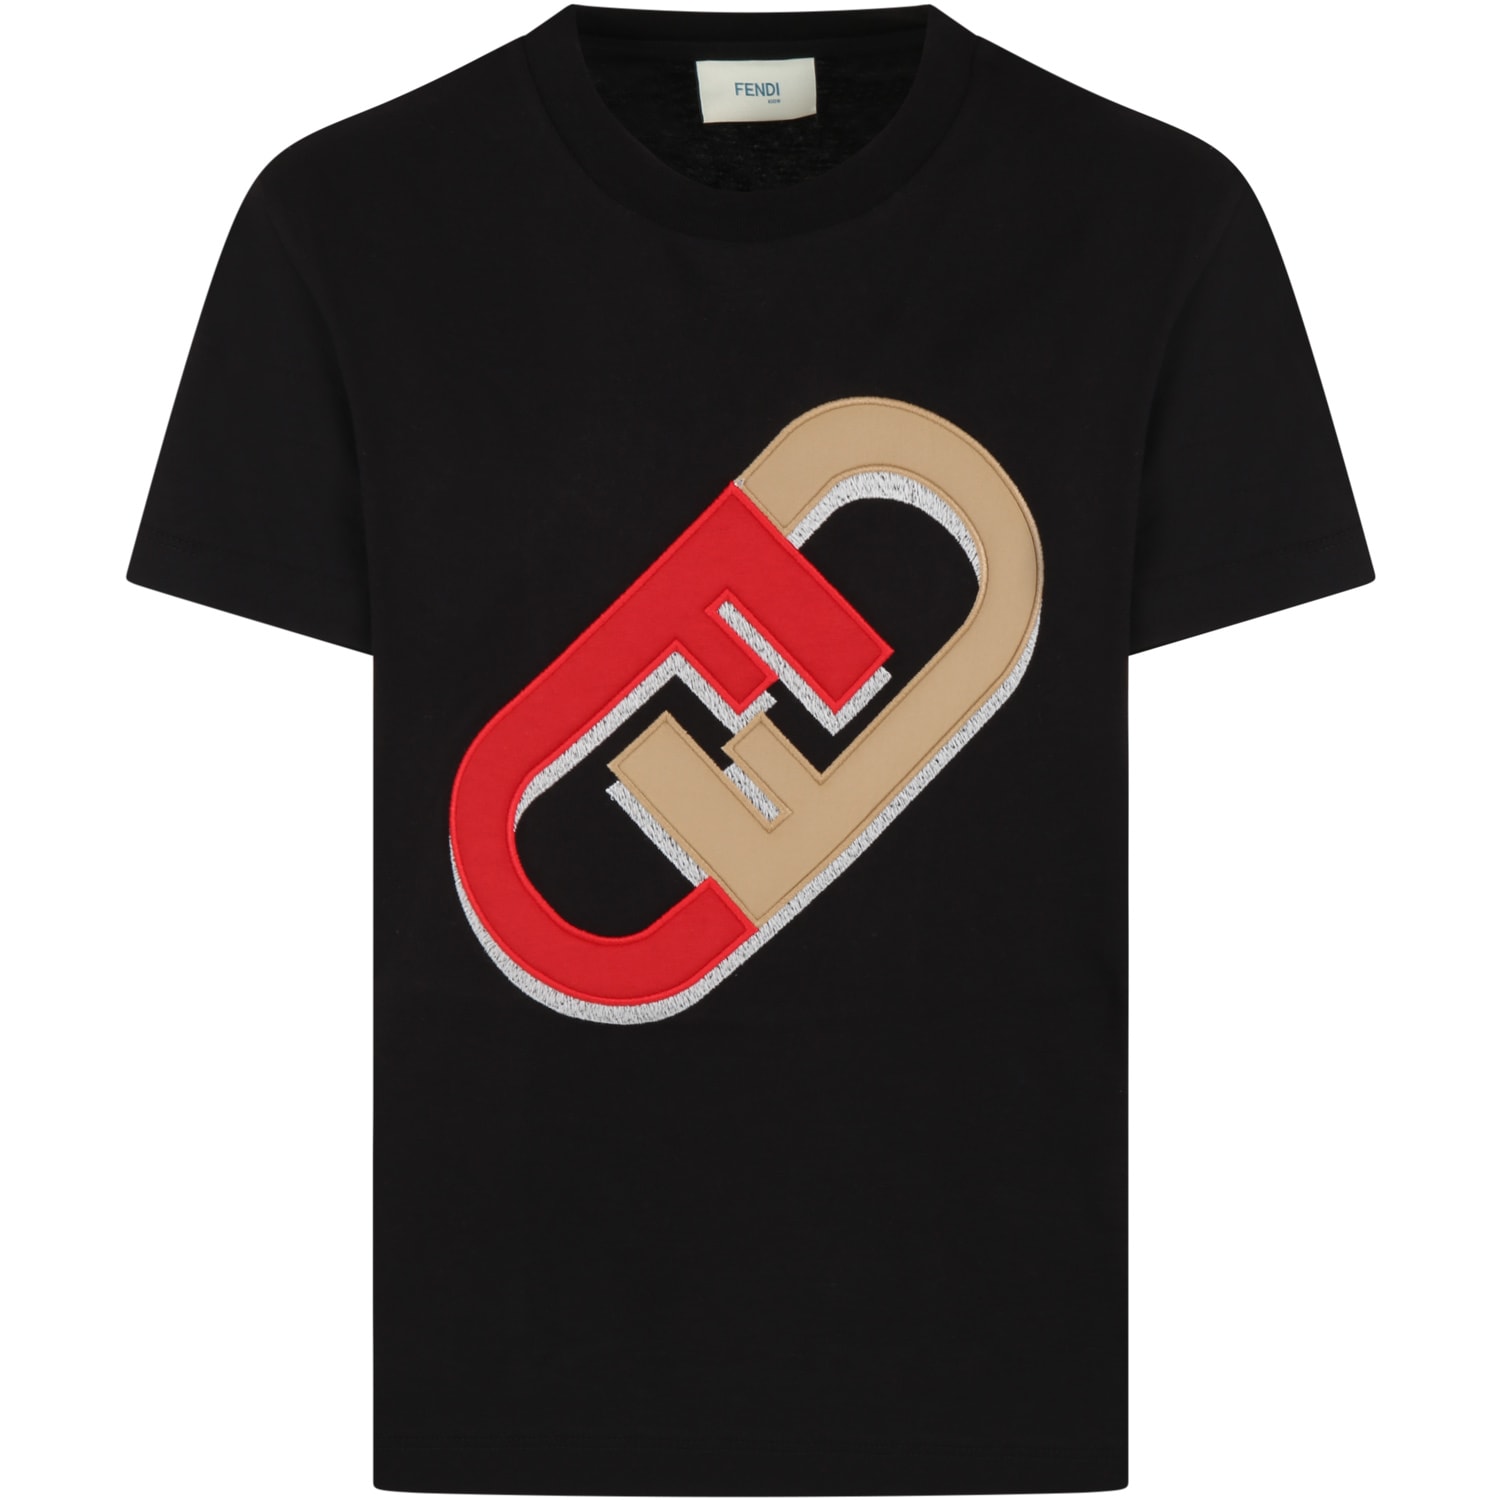 Fendi Black T-shirt For Kids With Iconic Double F